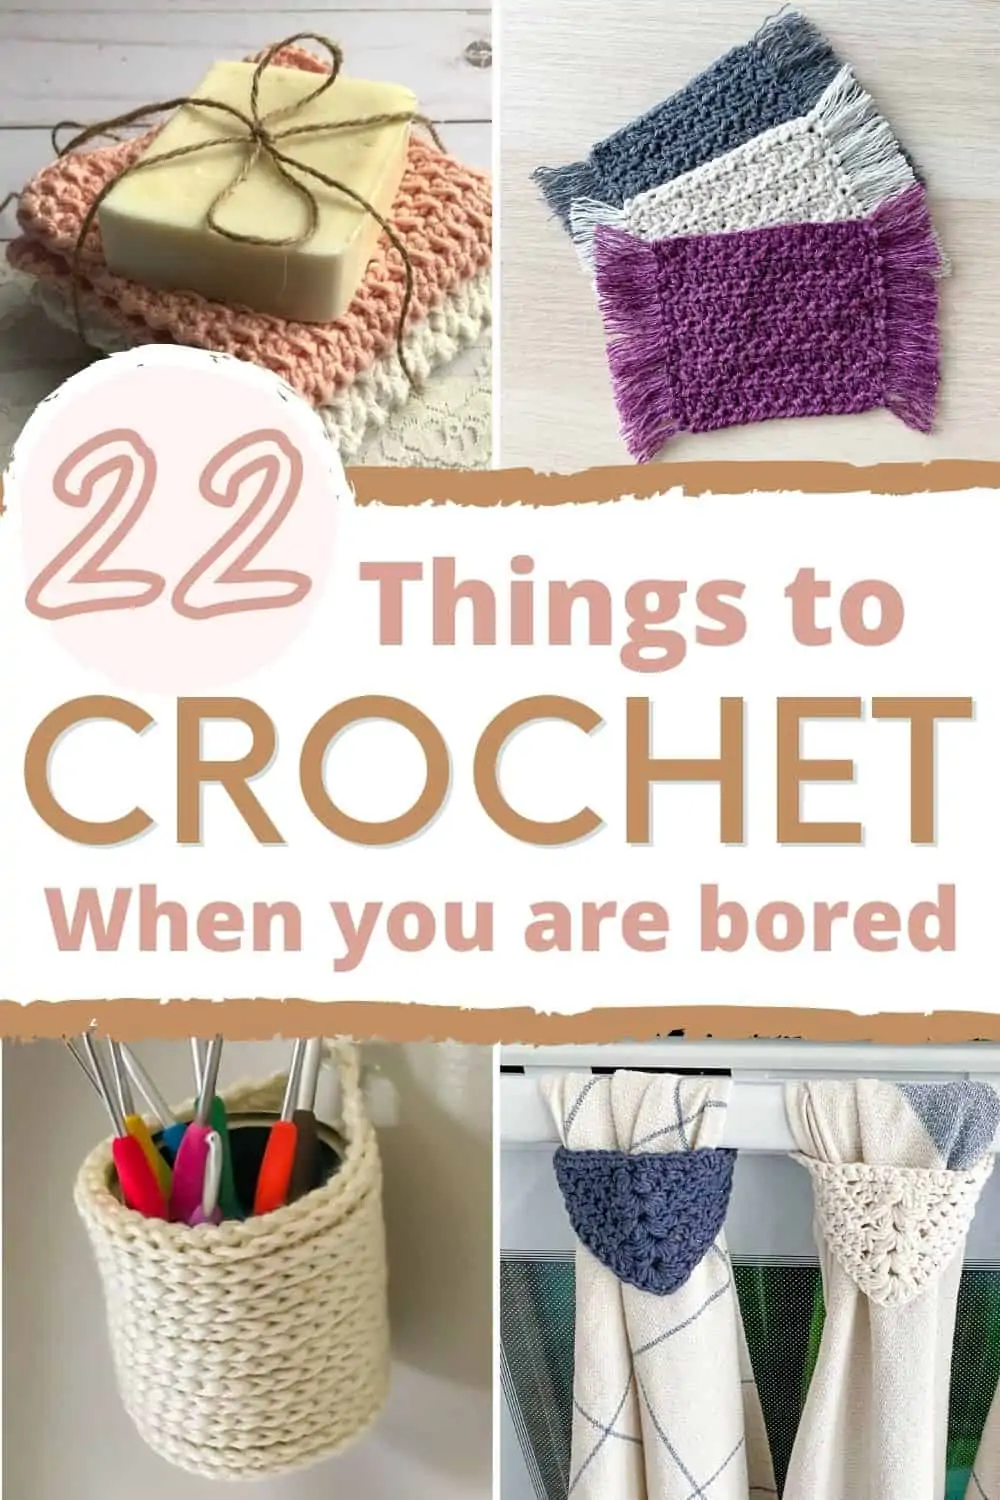 5 Little Monsters: 24 Quick Crochet Projects for Summer